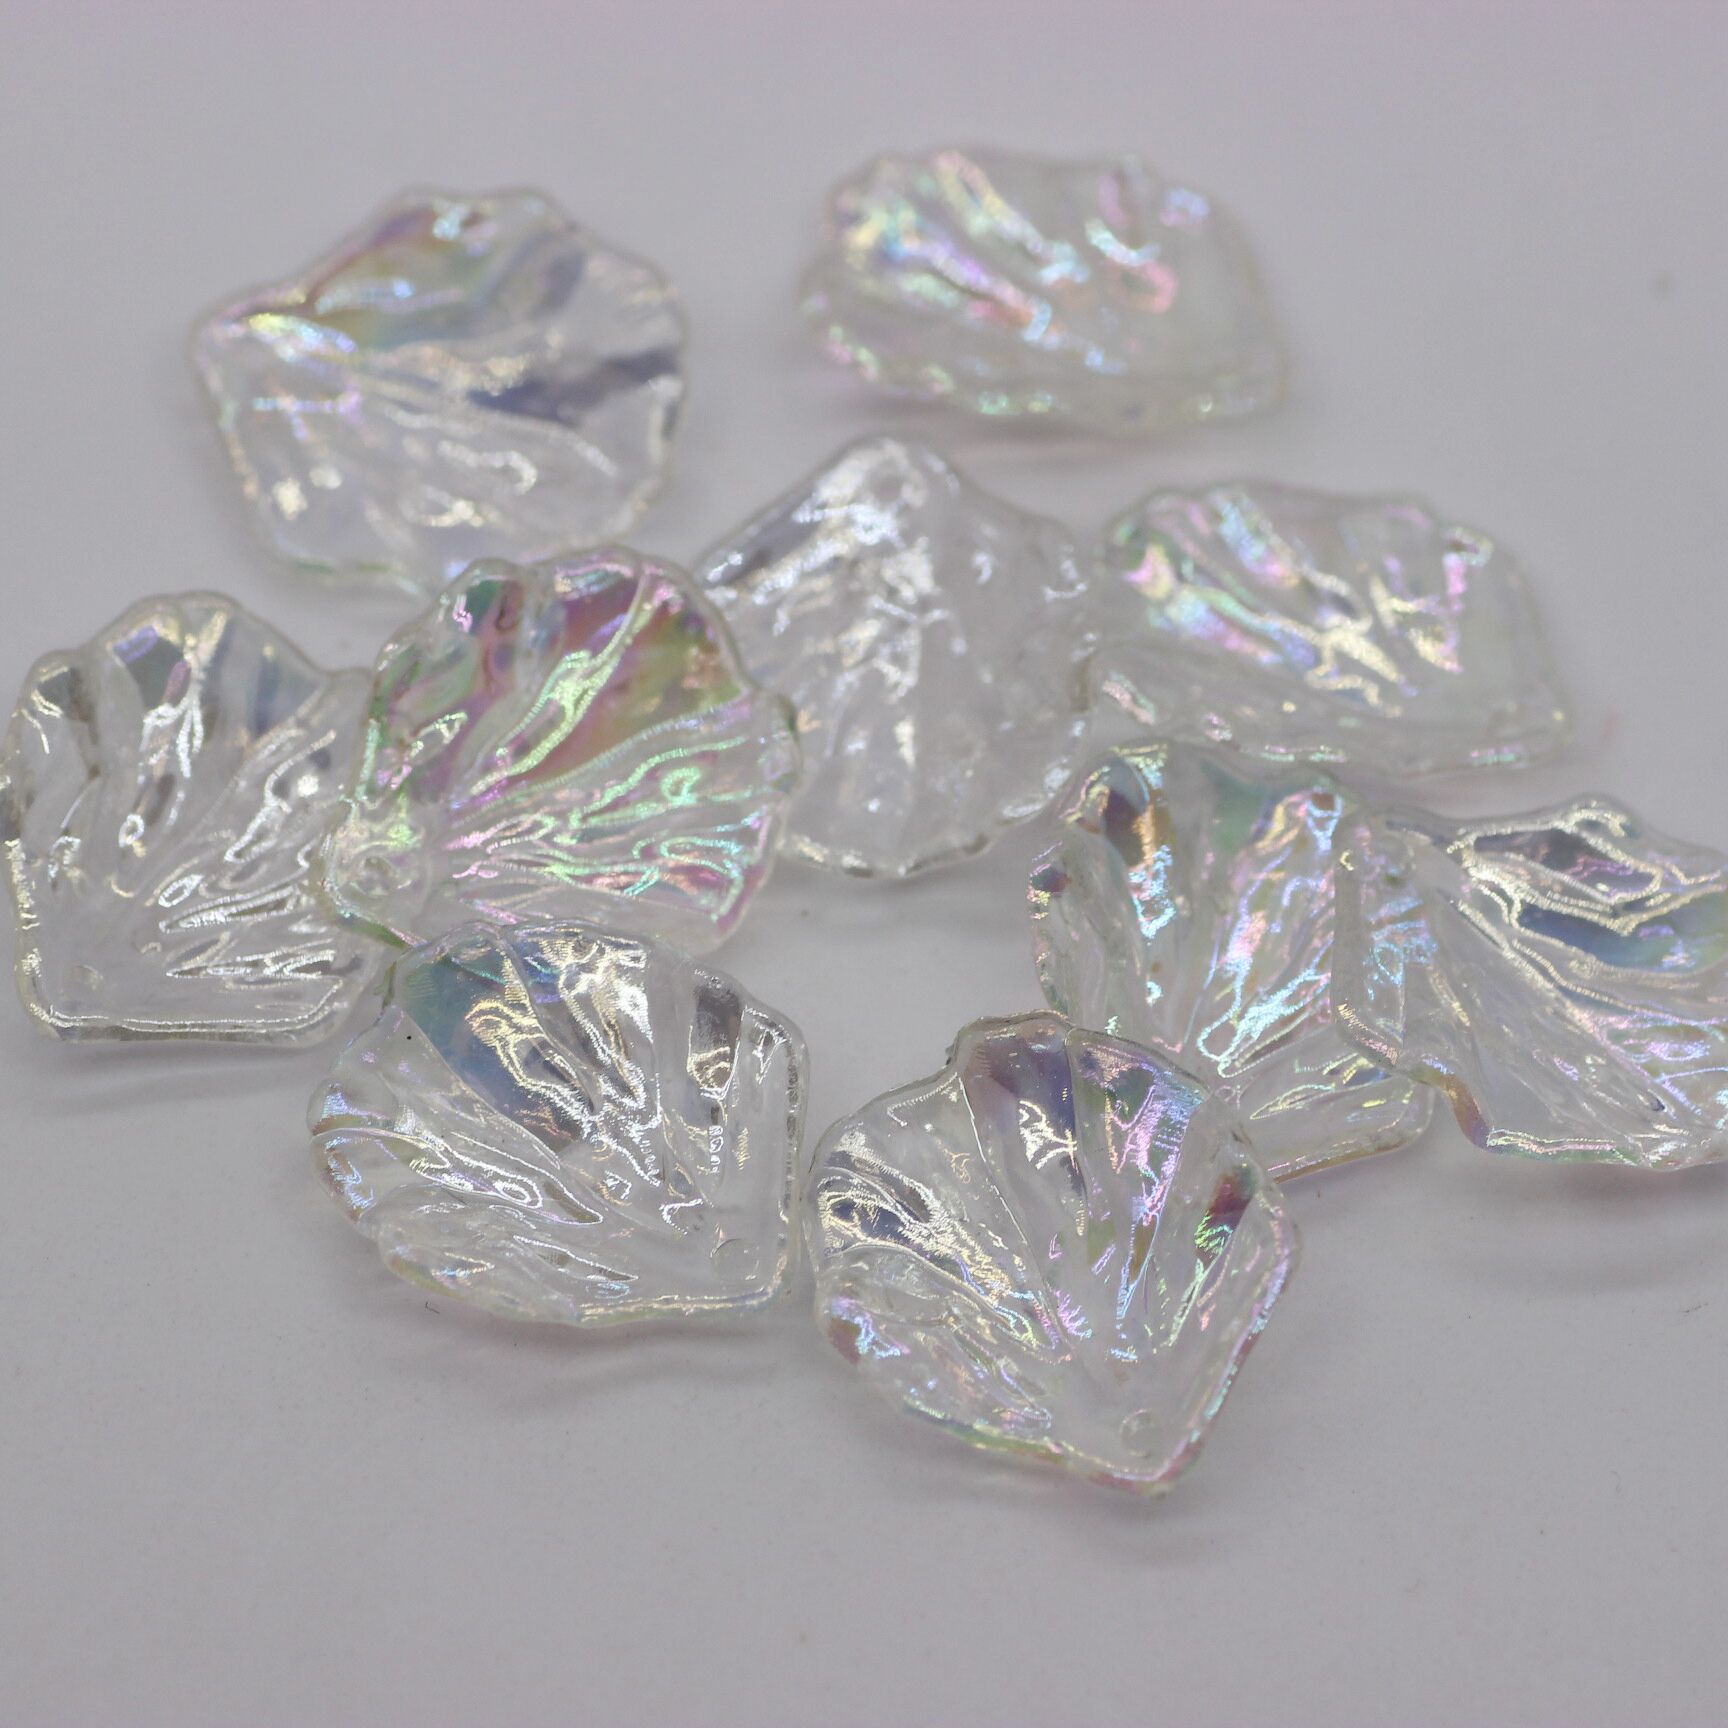 Approximately 18 * 20 mm clear white